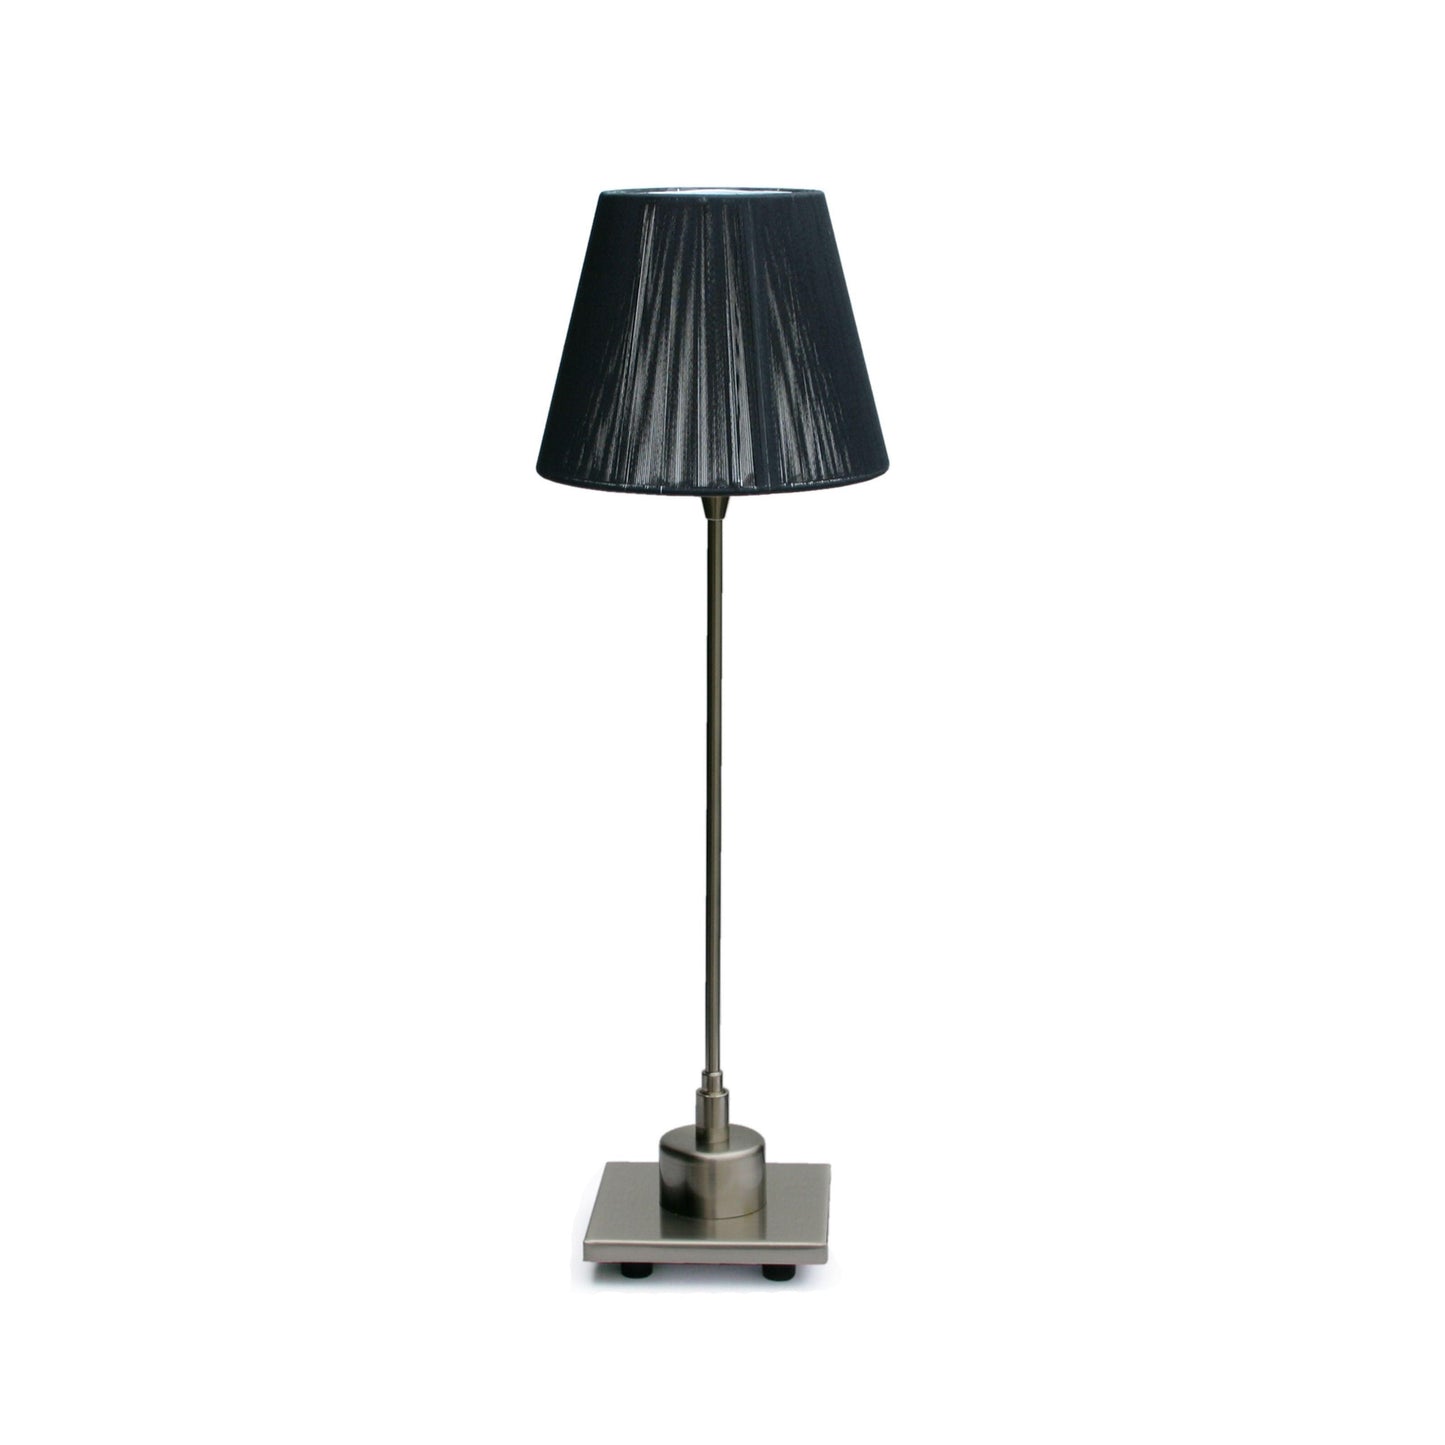 Gemini Low Voltage Table Lamp With Black Shade - V&M IMPORTS Australia